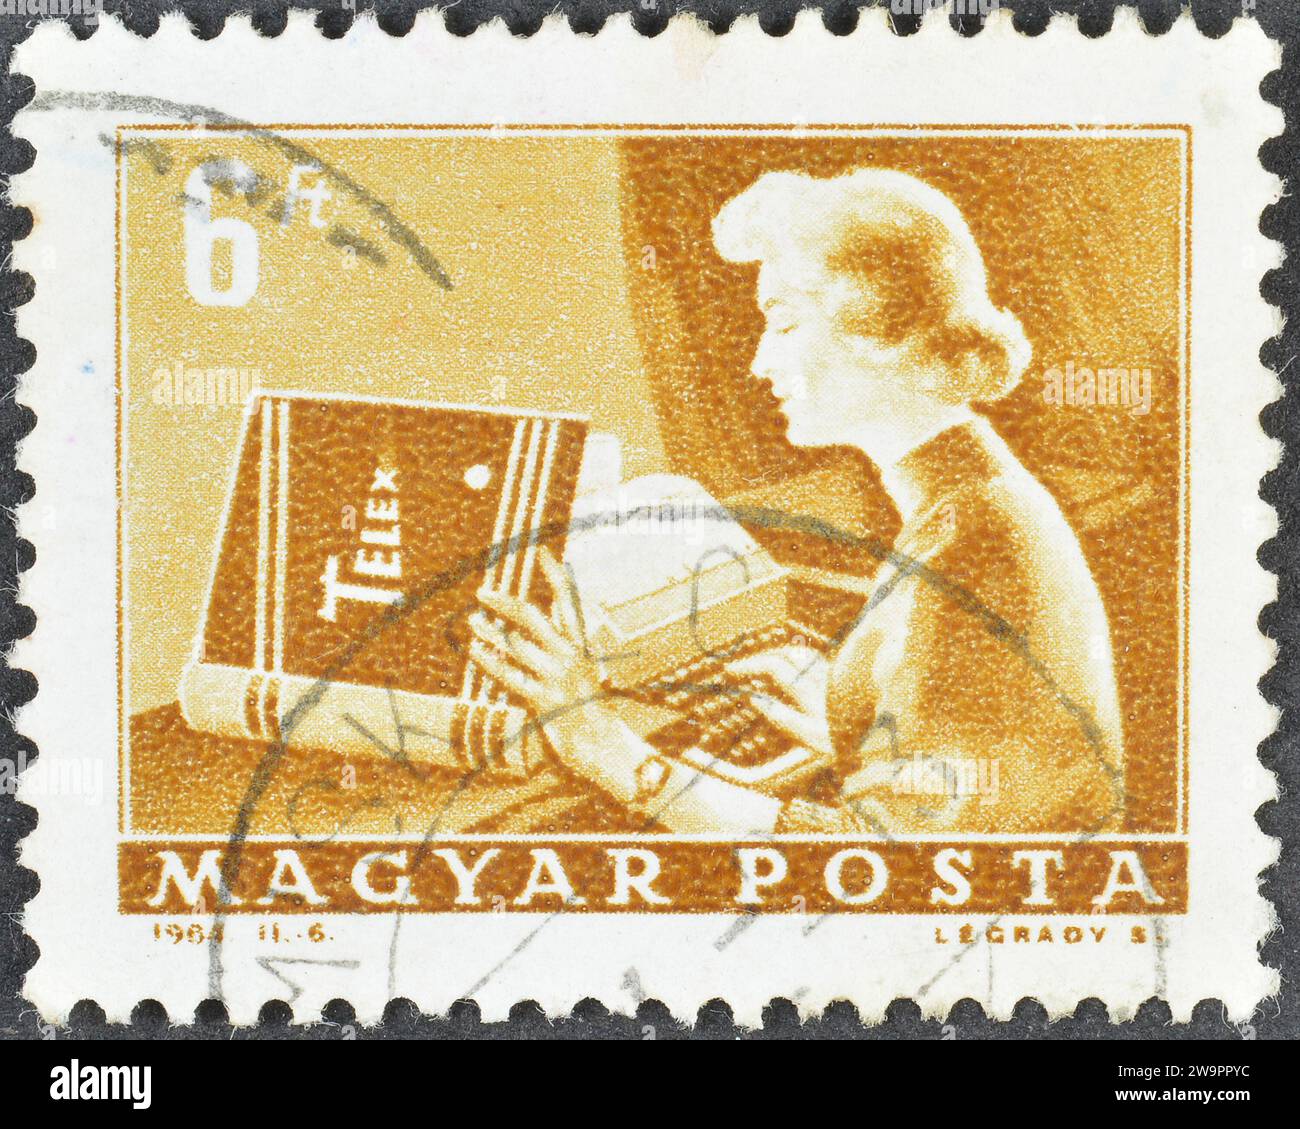 Cancelled postage stamp printed by Hungary, that shows Telex operator, circa 1964. Stock Photo